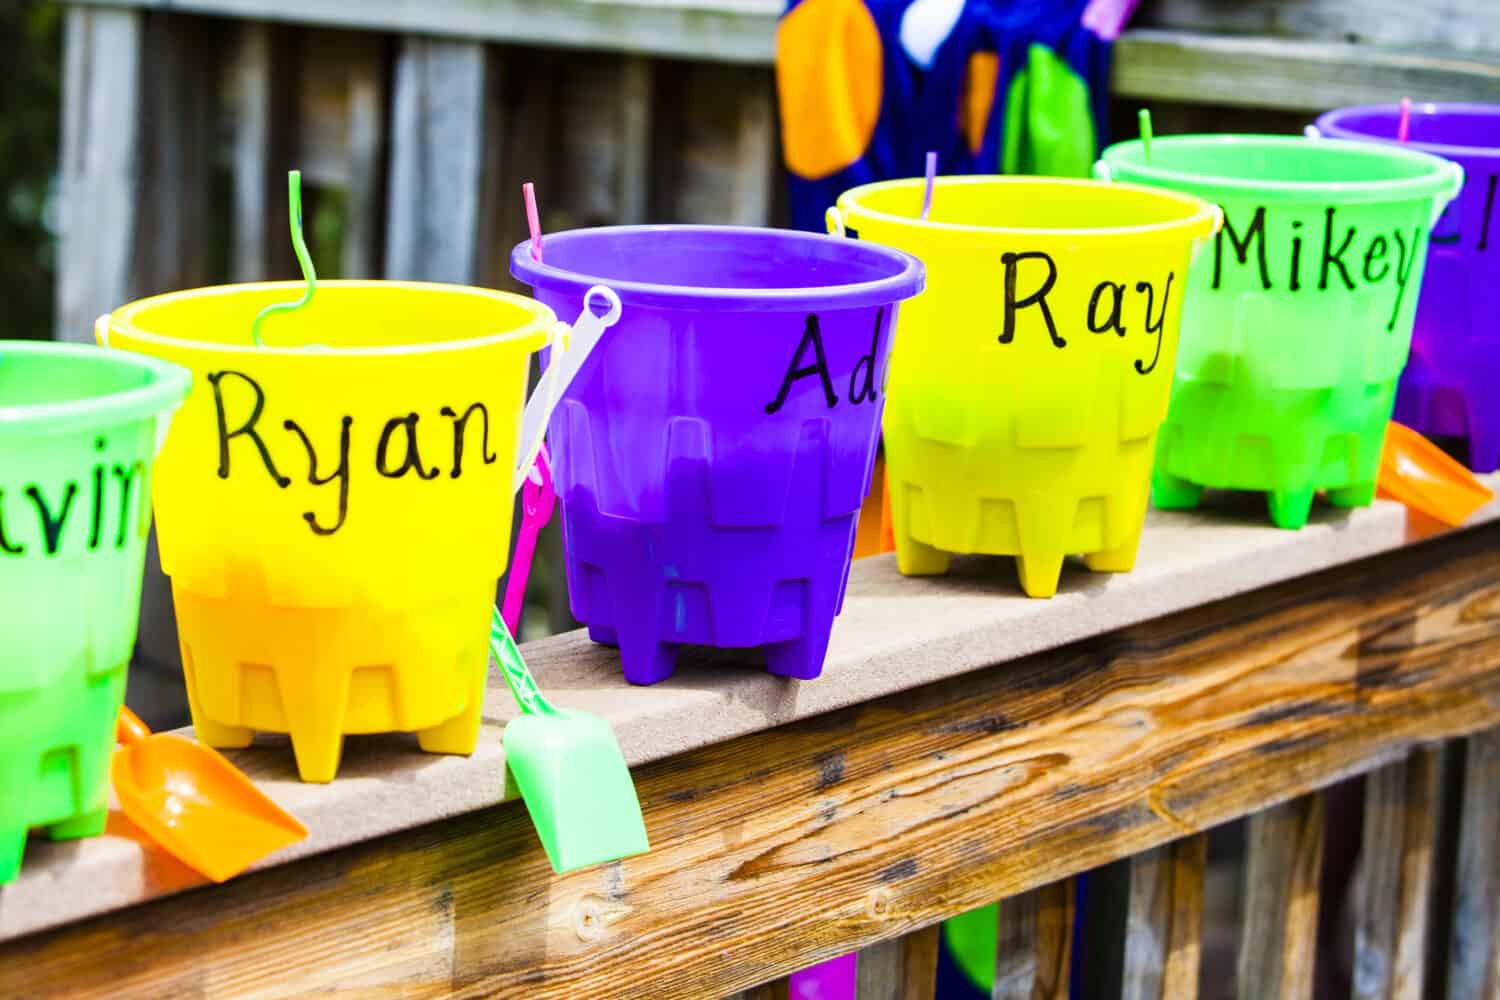 Beach party favors. Buckets with each child's name filled with candy and toys, lined up outside on a wooden rail